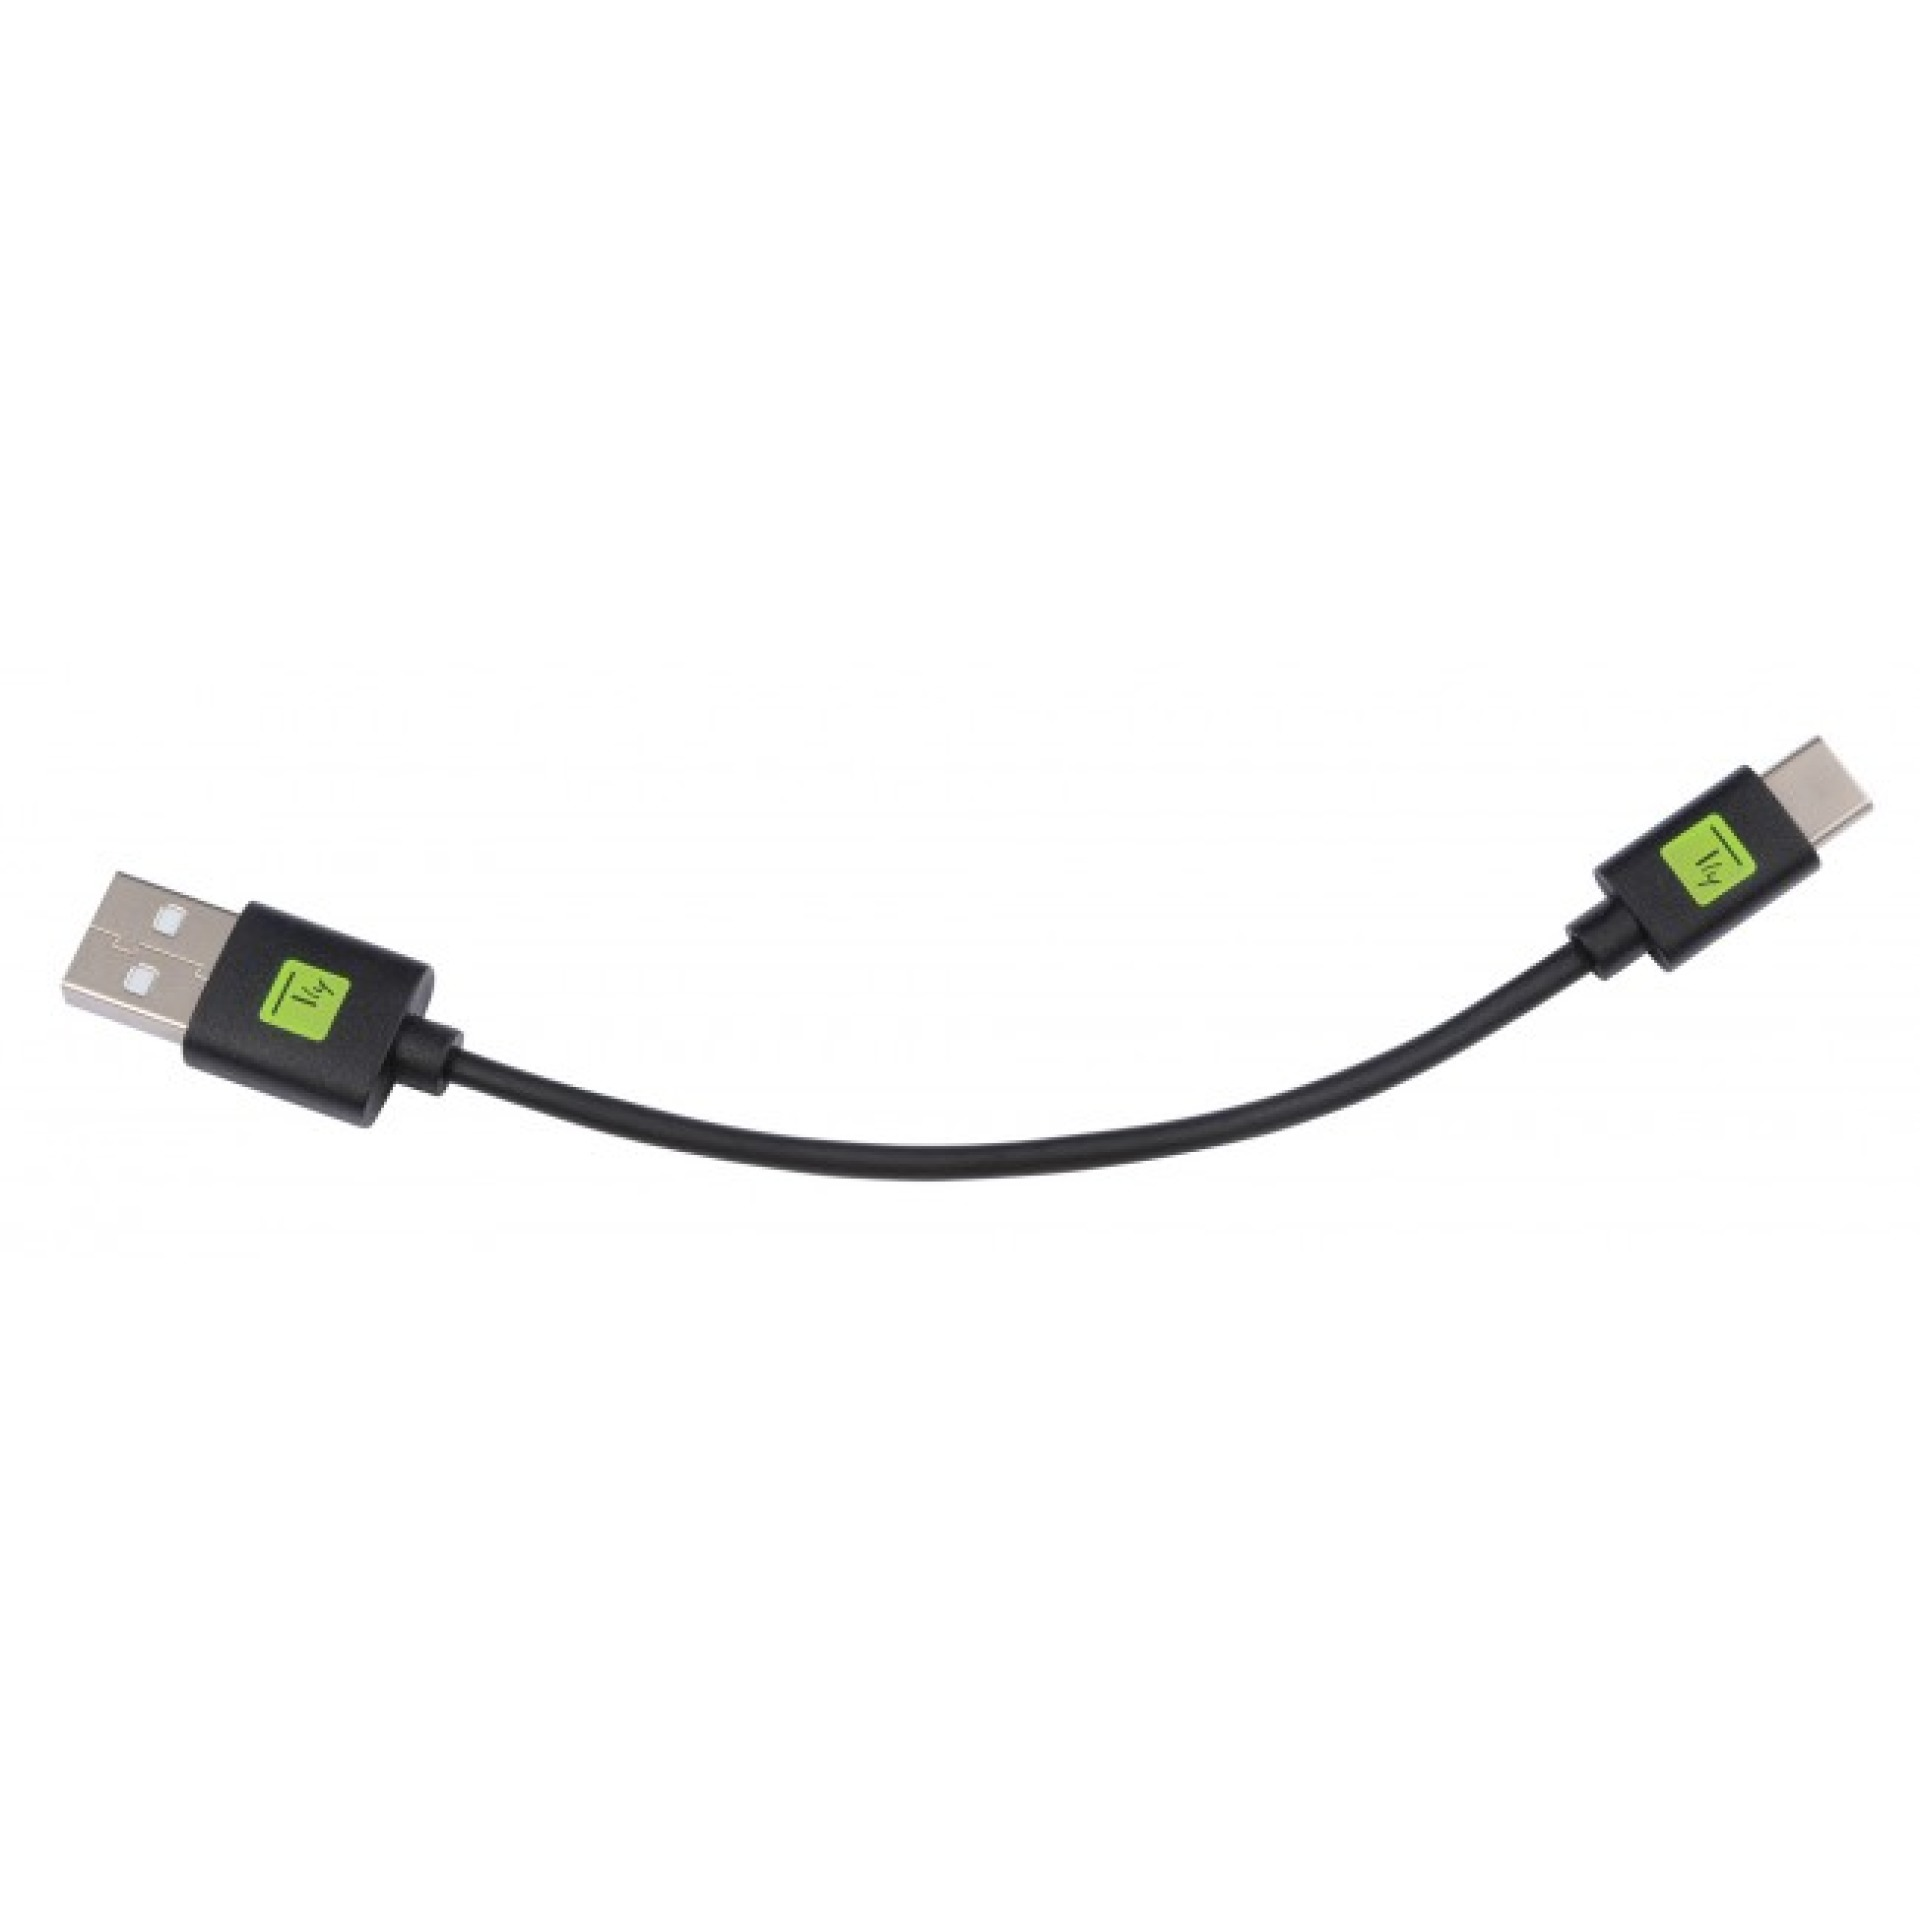 Short USB cable Type-C™ male to USB 2.0 A male 16cm